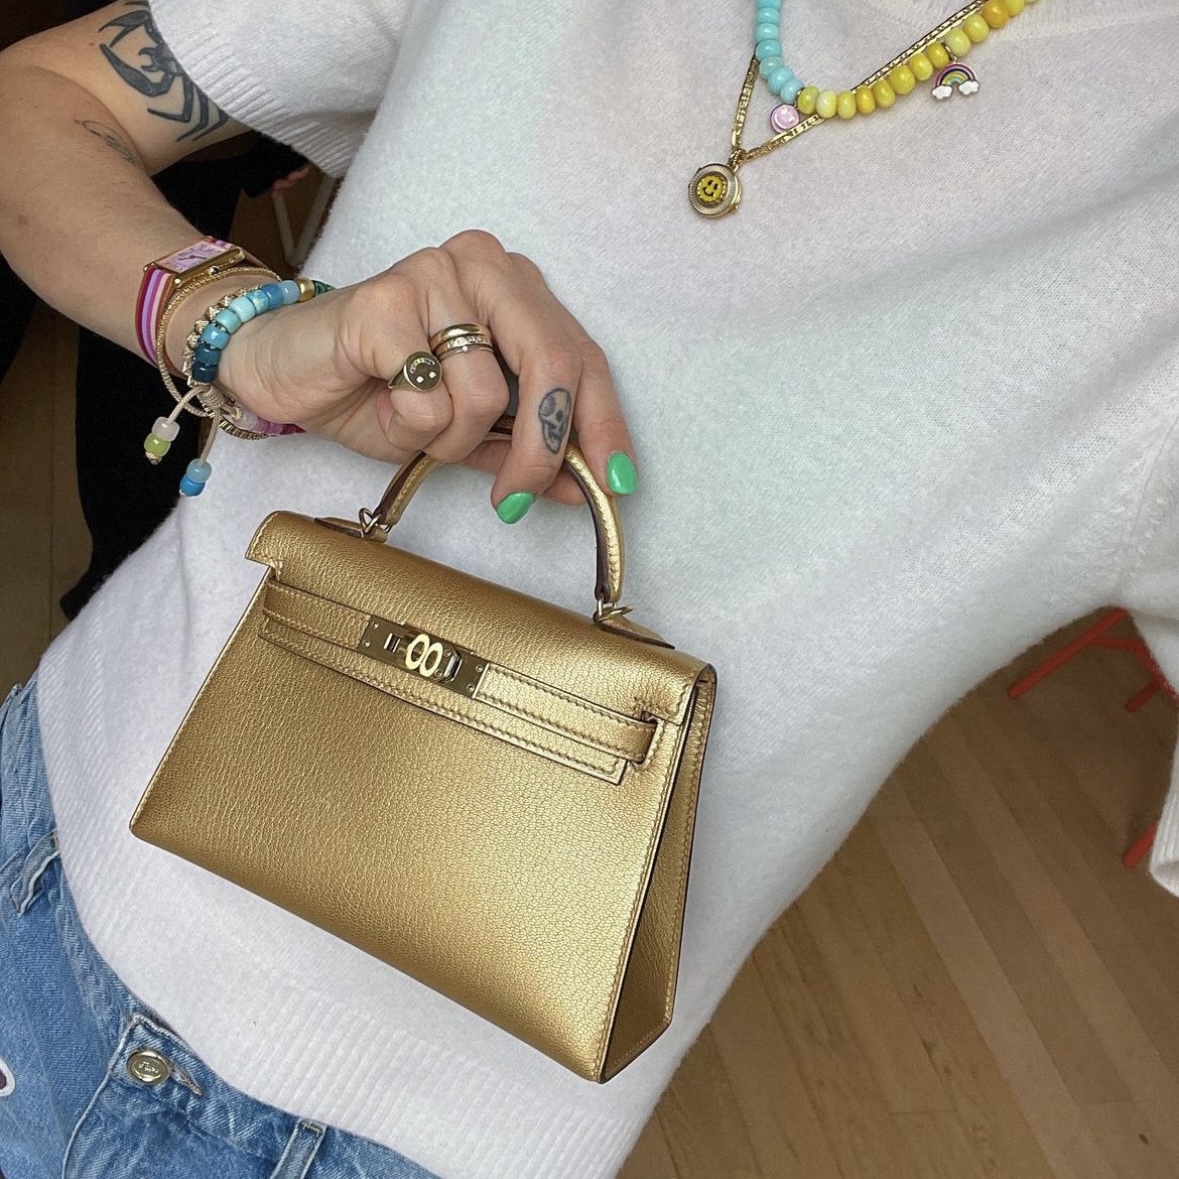 Bag Trends Creating a Buzz in 2023 - PurseBop